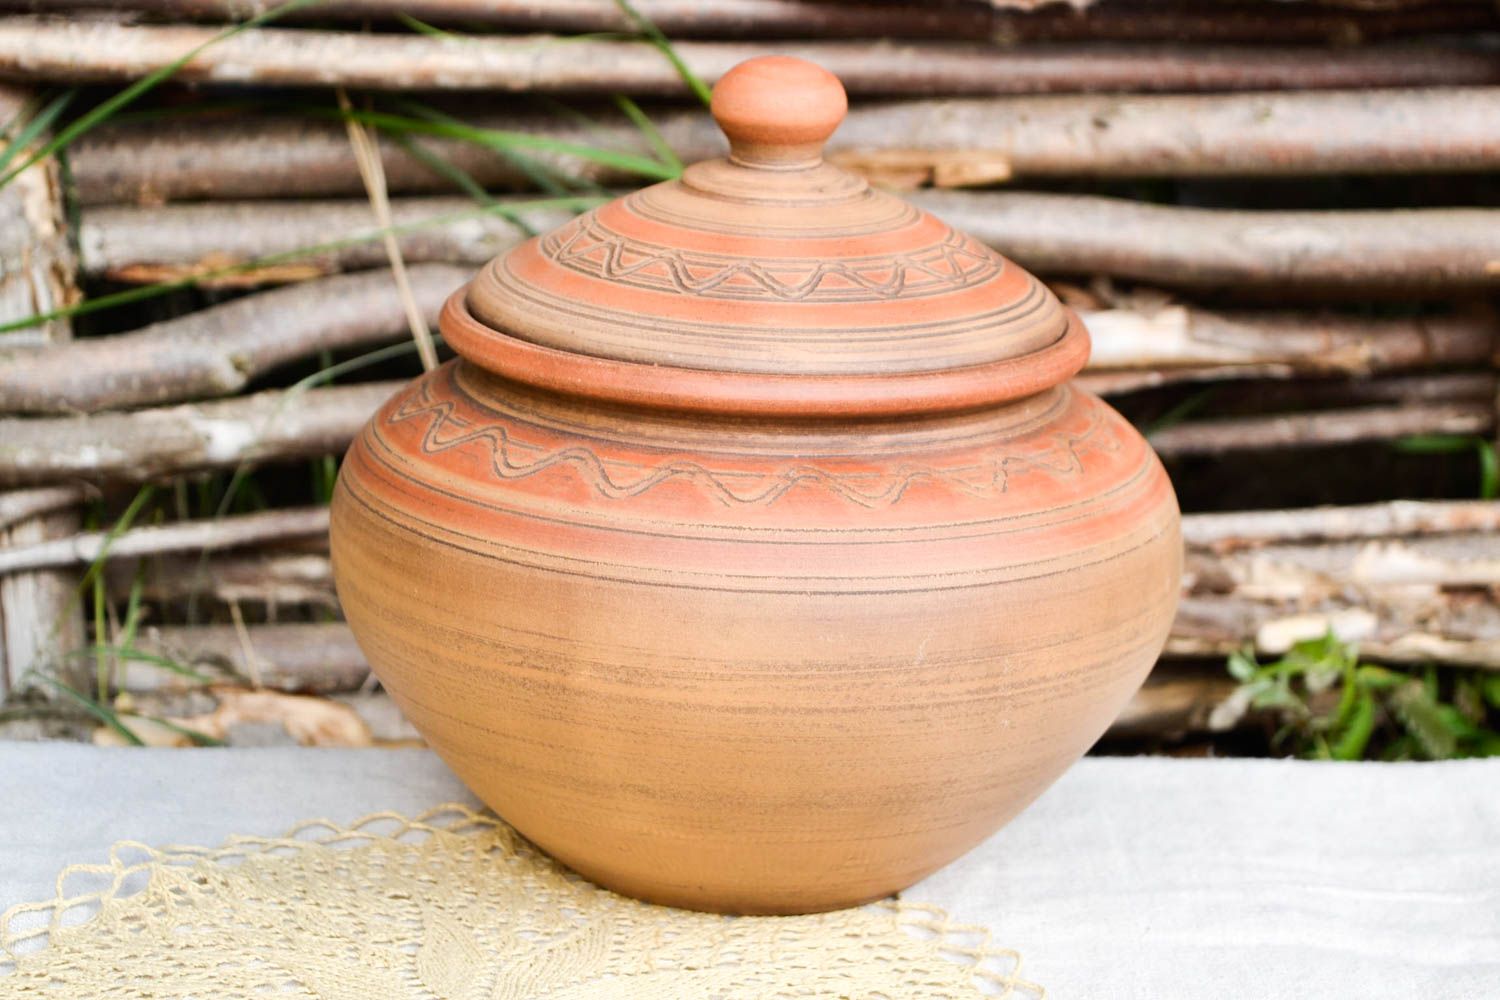 100 oz ceramic handmade baking pot with a lid in ethnic style 3,8 lb photo 1